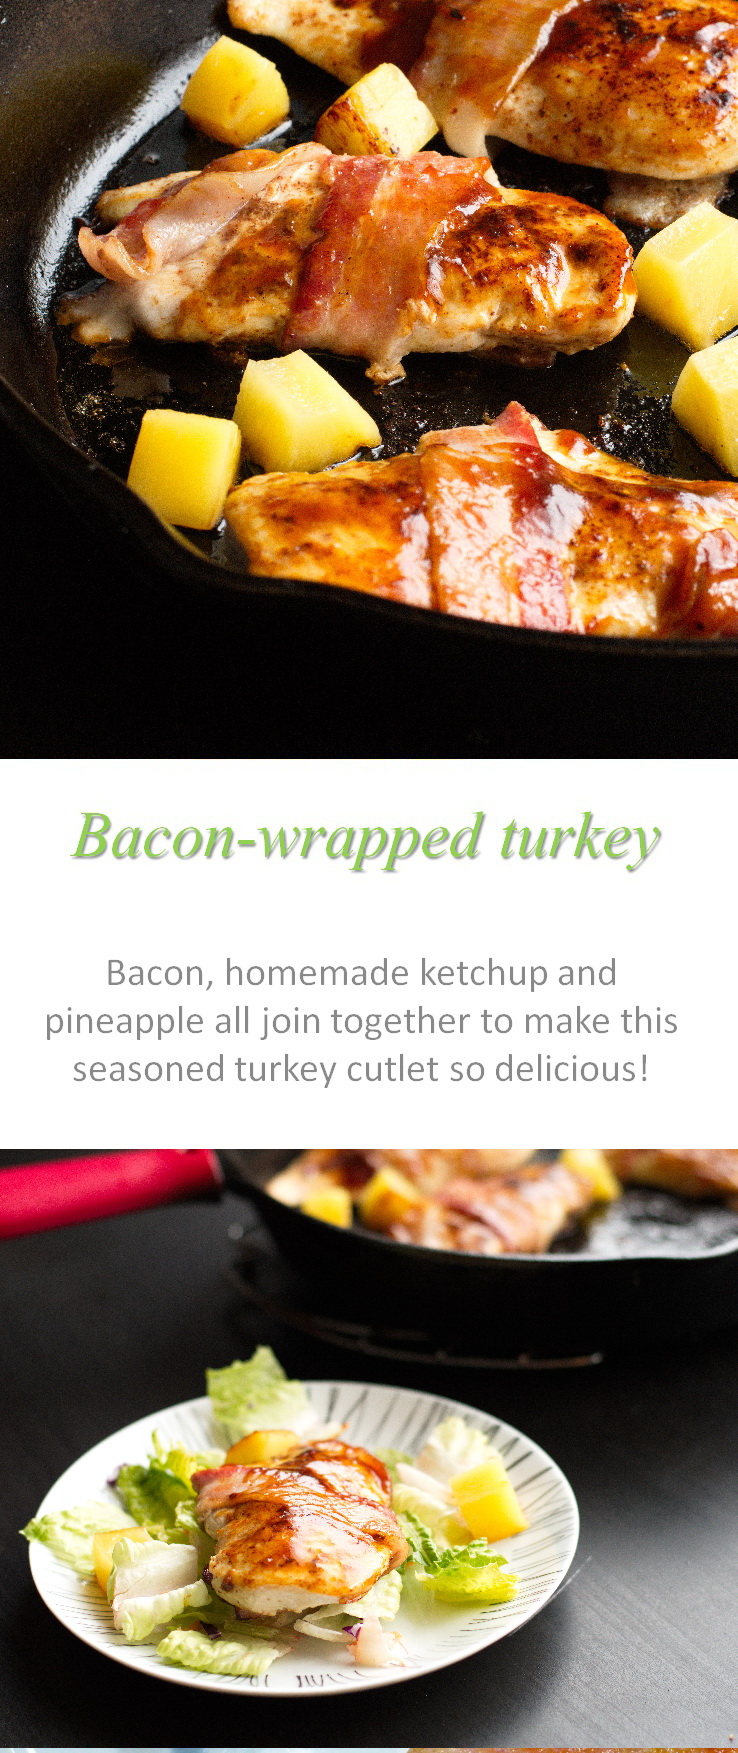 These bacon wrapped turkey cutlets are an awesome combination of bacon, homemade ketchup, seasonings and pineapple for an amazing taste #bacon